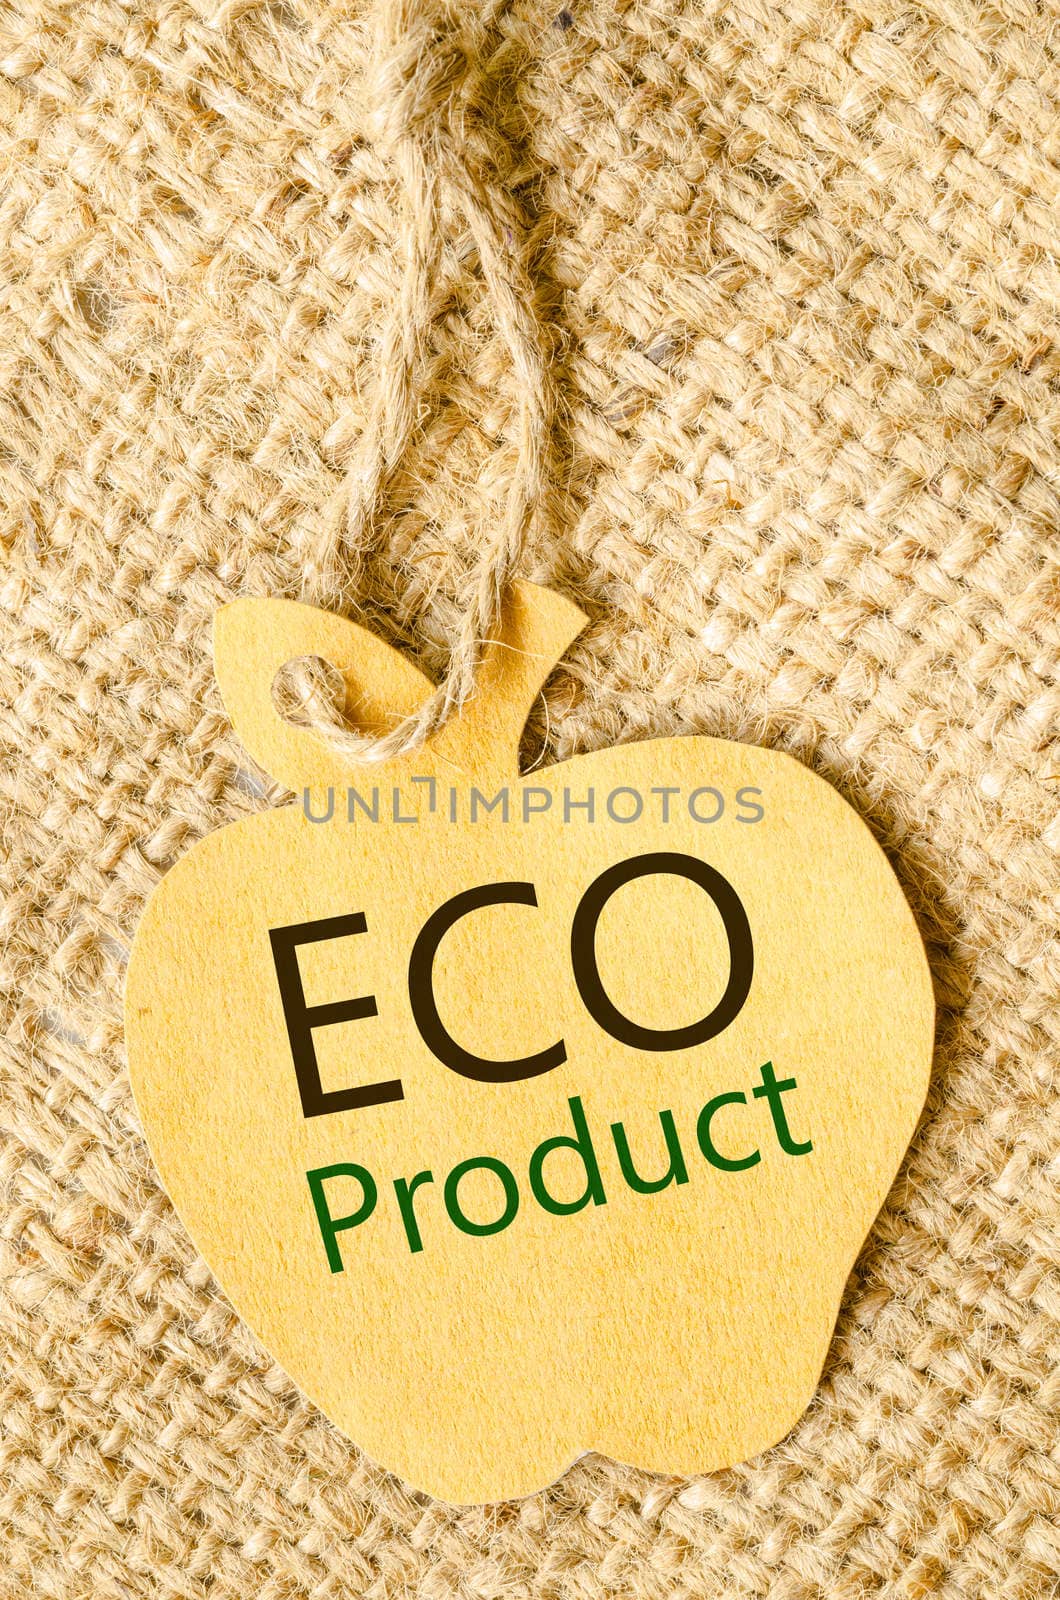 ECO product word in brown paper tag on sack background.